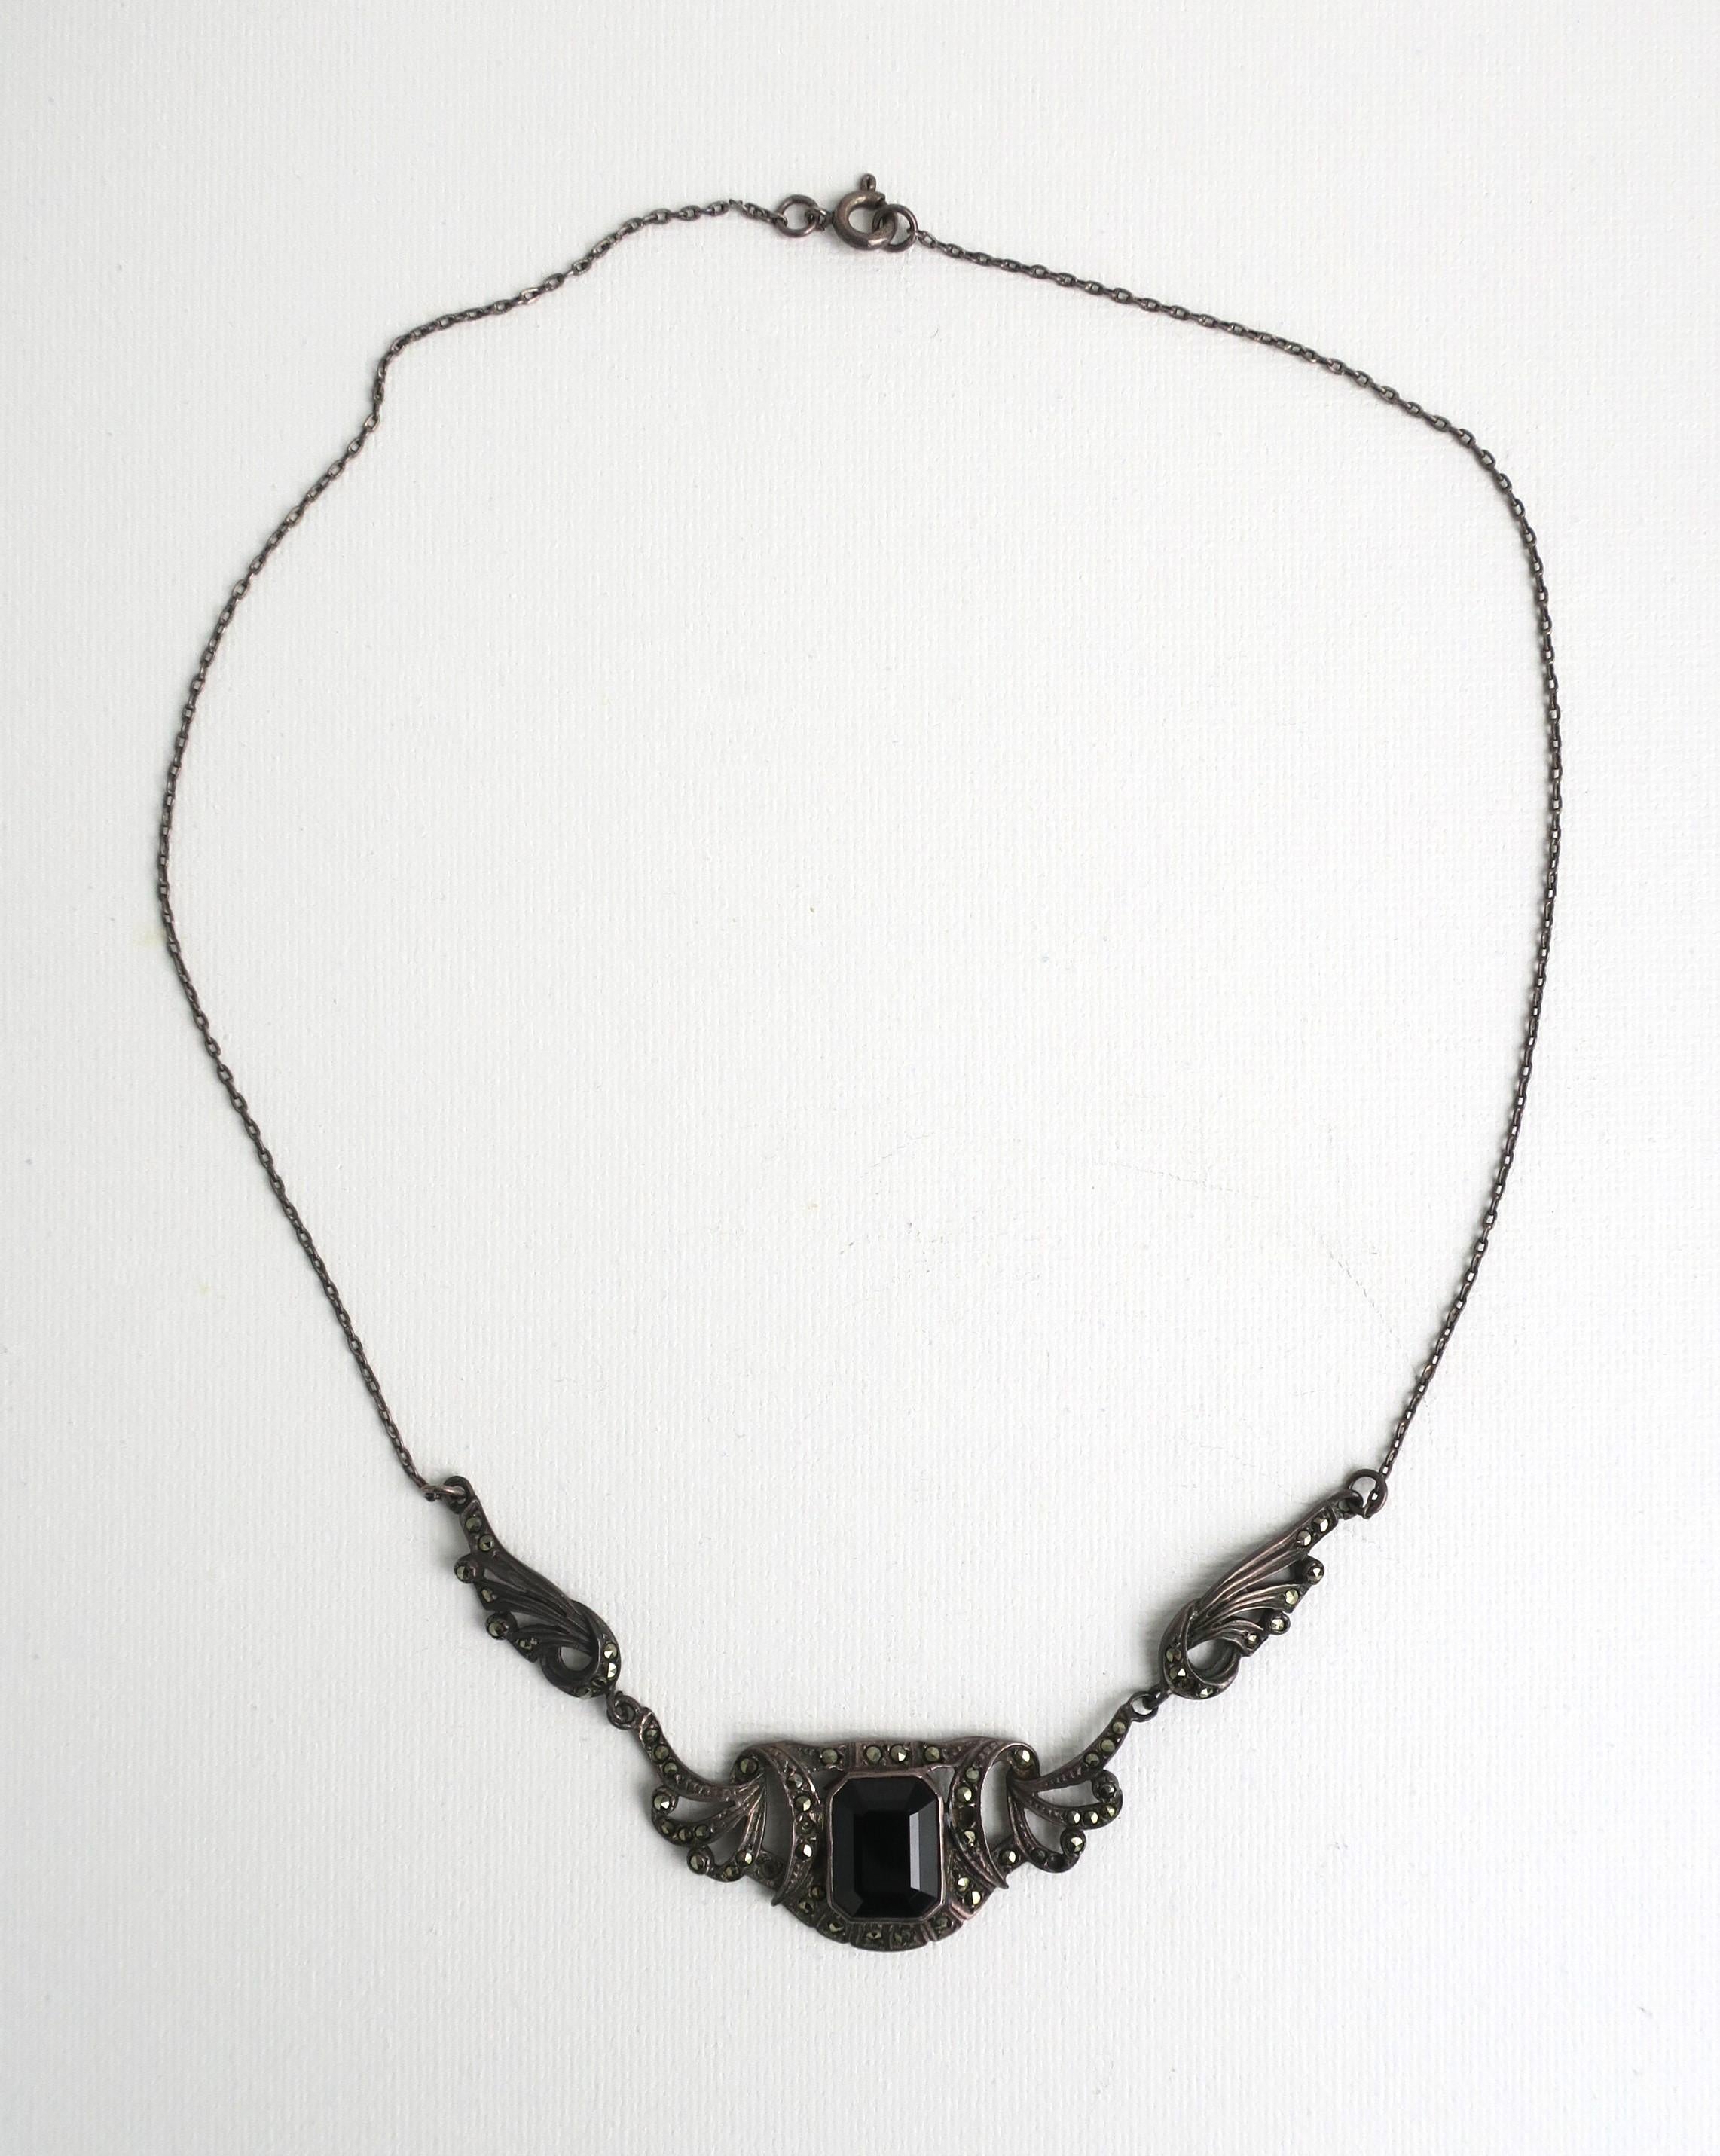 A sterling silver and black onyx necklace, in the Art Nouveau style, circa late-20th century. Necklace has a nice sized black onyx center stone. Necklace looks beautiful around neck as demonstrated in fourth image. Necklace is shown unpolished which